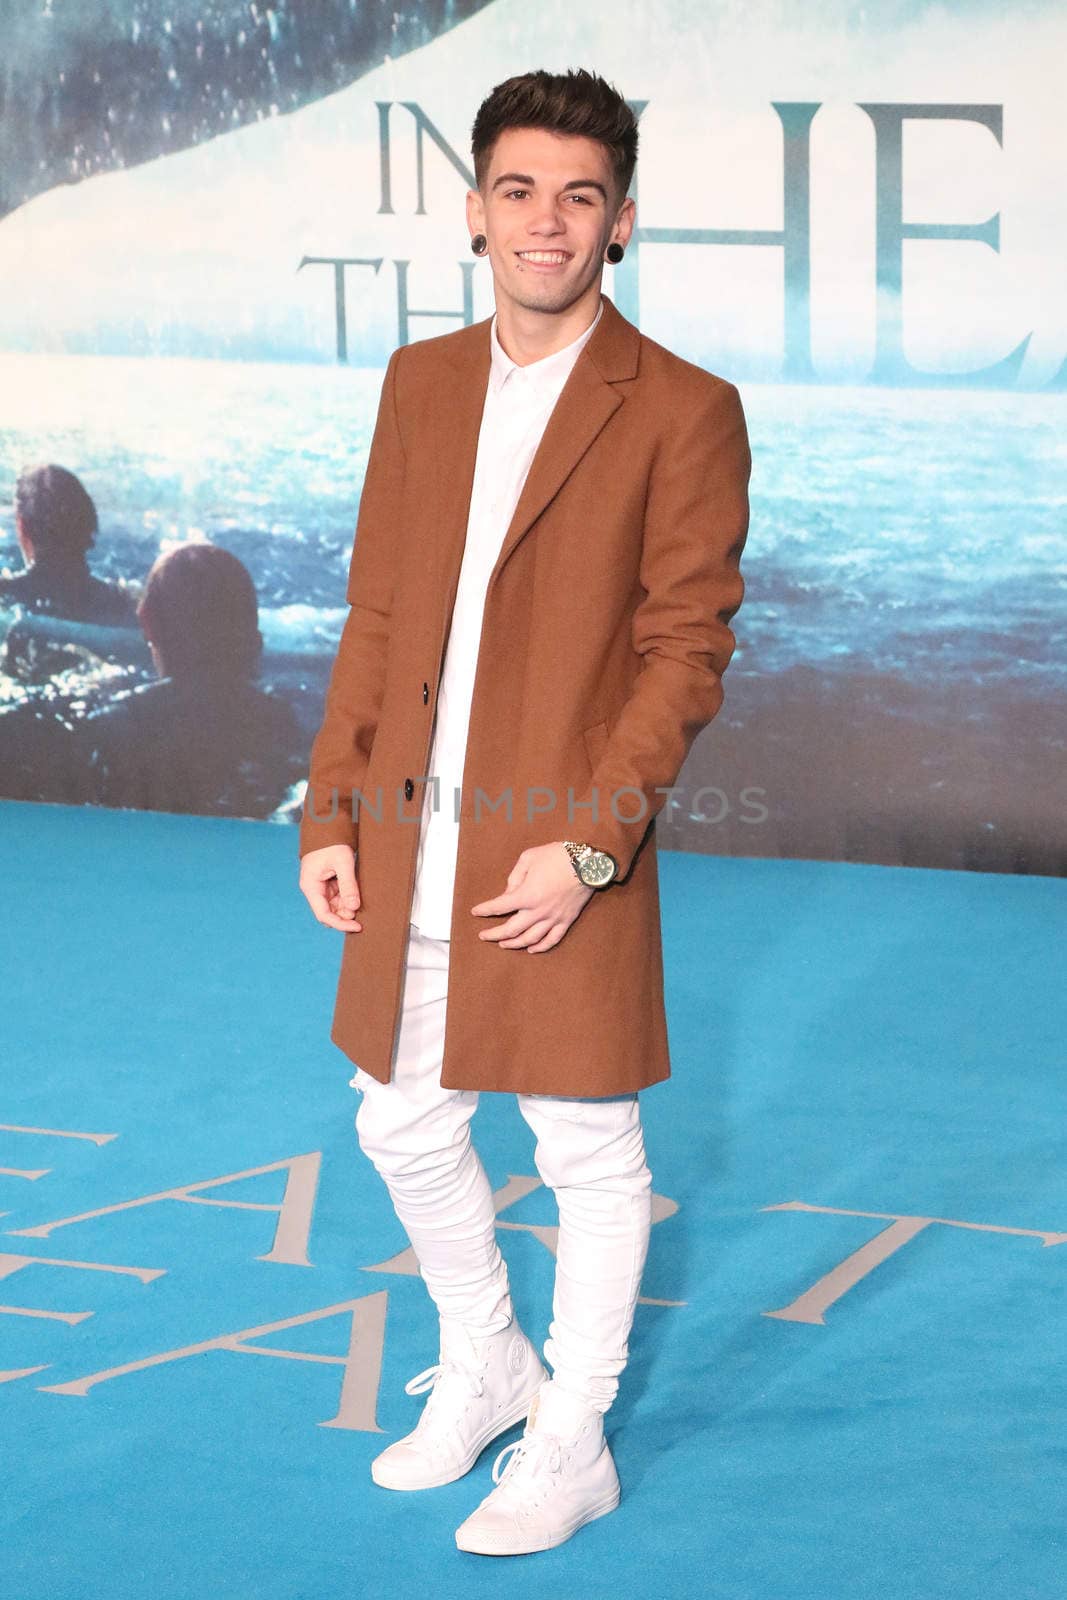 UNITED KINGDOM, London: X Factor star Jake Sims poses for photographers during the premier of In the Heart of the Sea, a Ron Howard movie, in London on December 2nd, 2015.